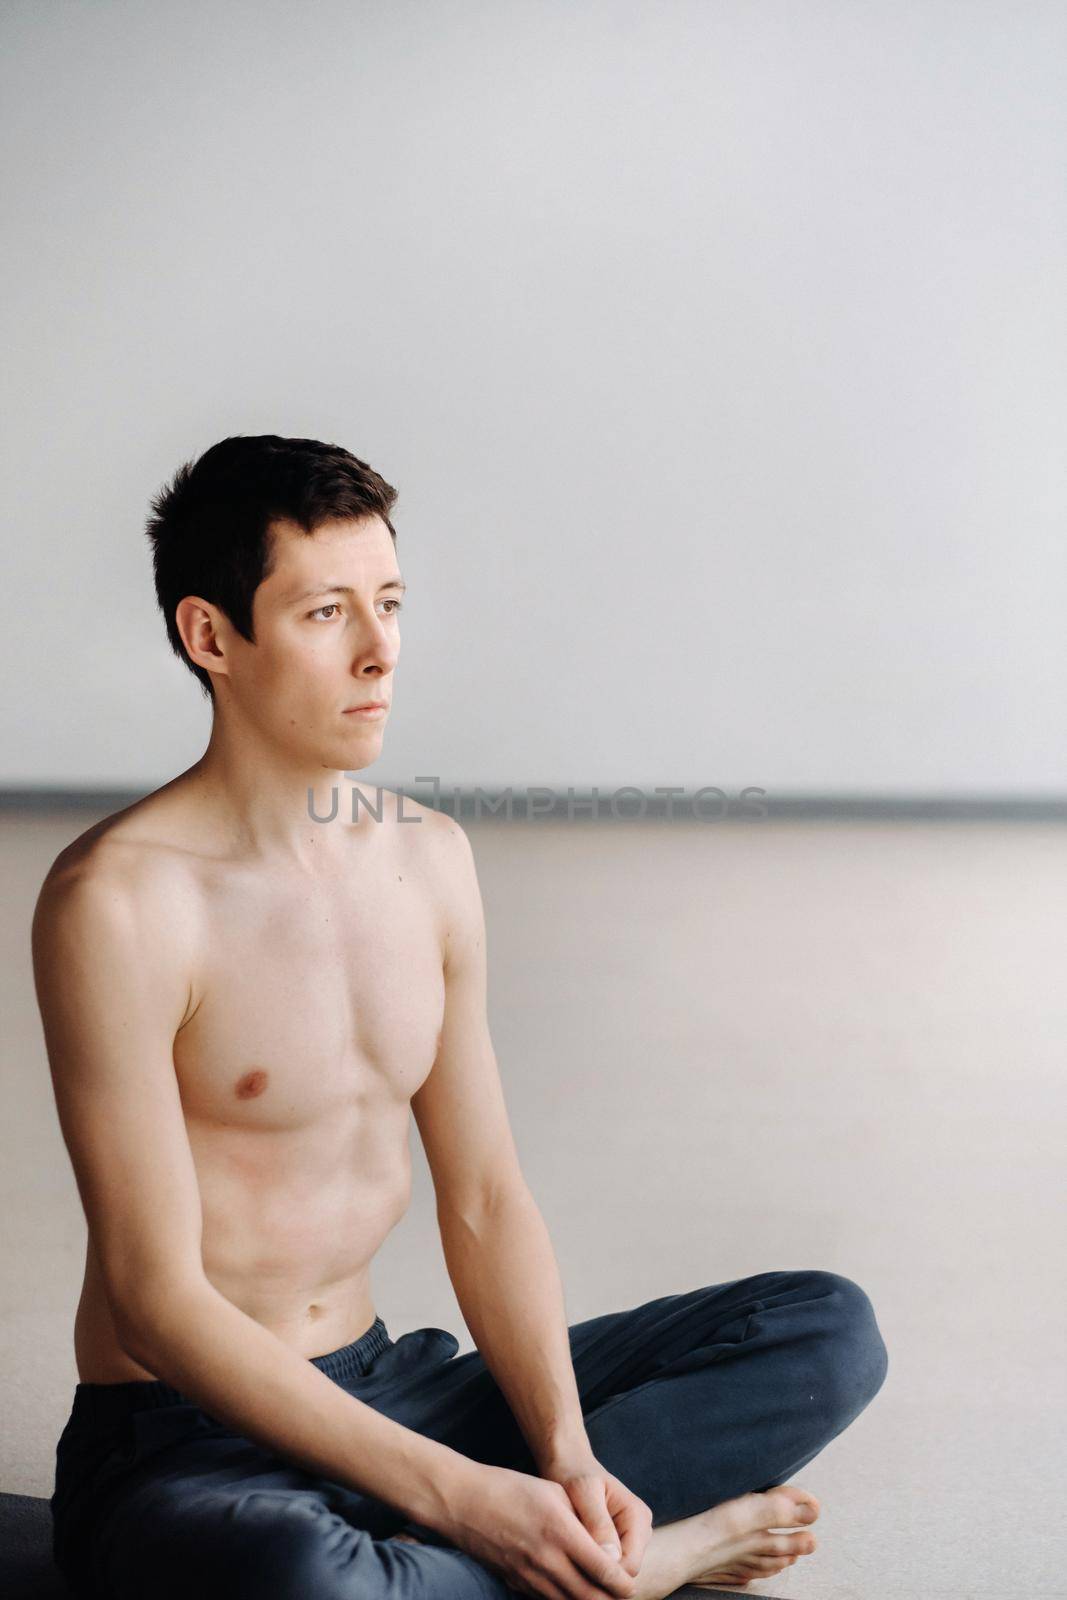 A male athlete with a bare torso is sitting in the gym before training and resting.